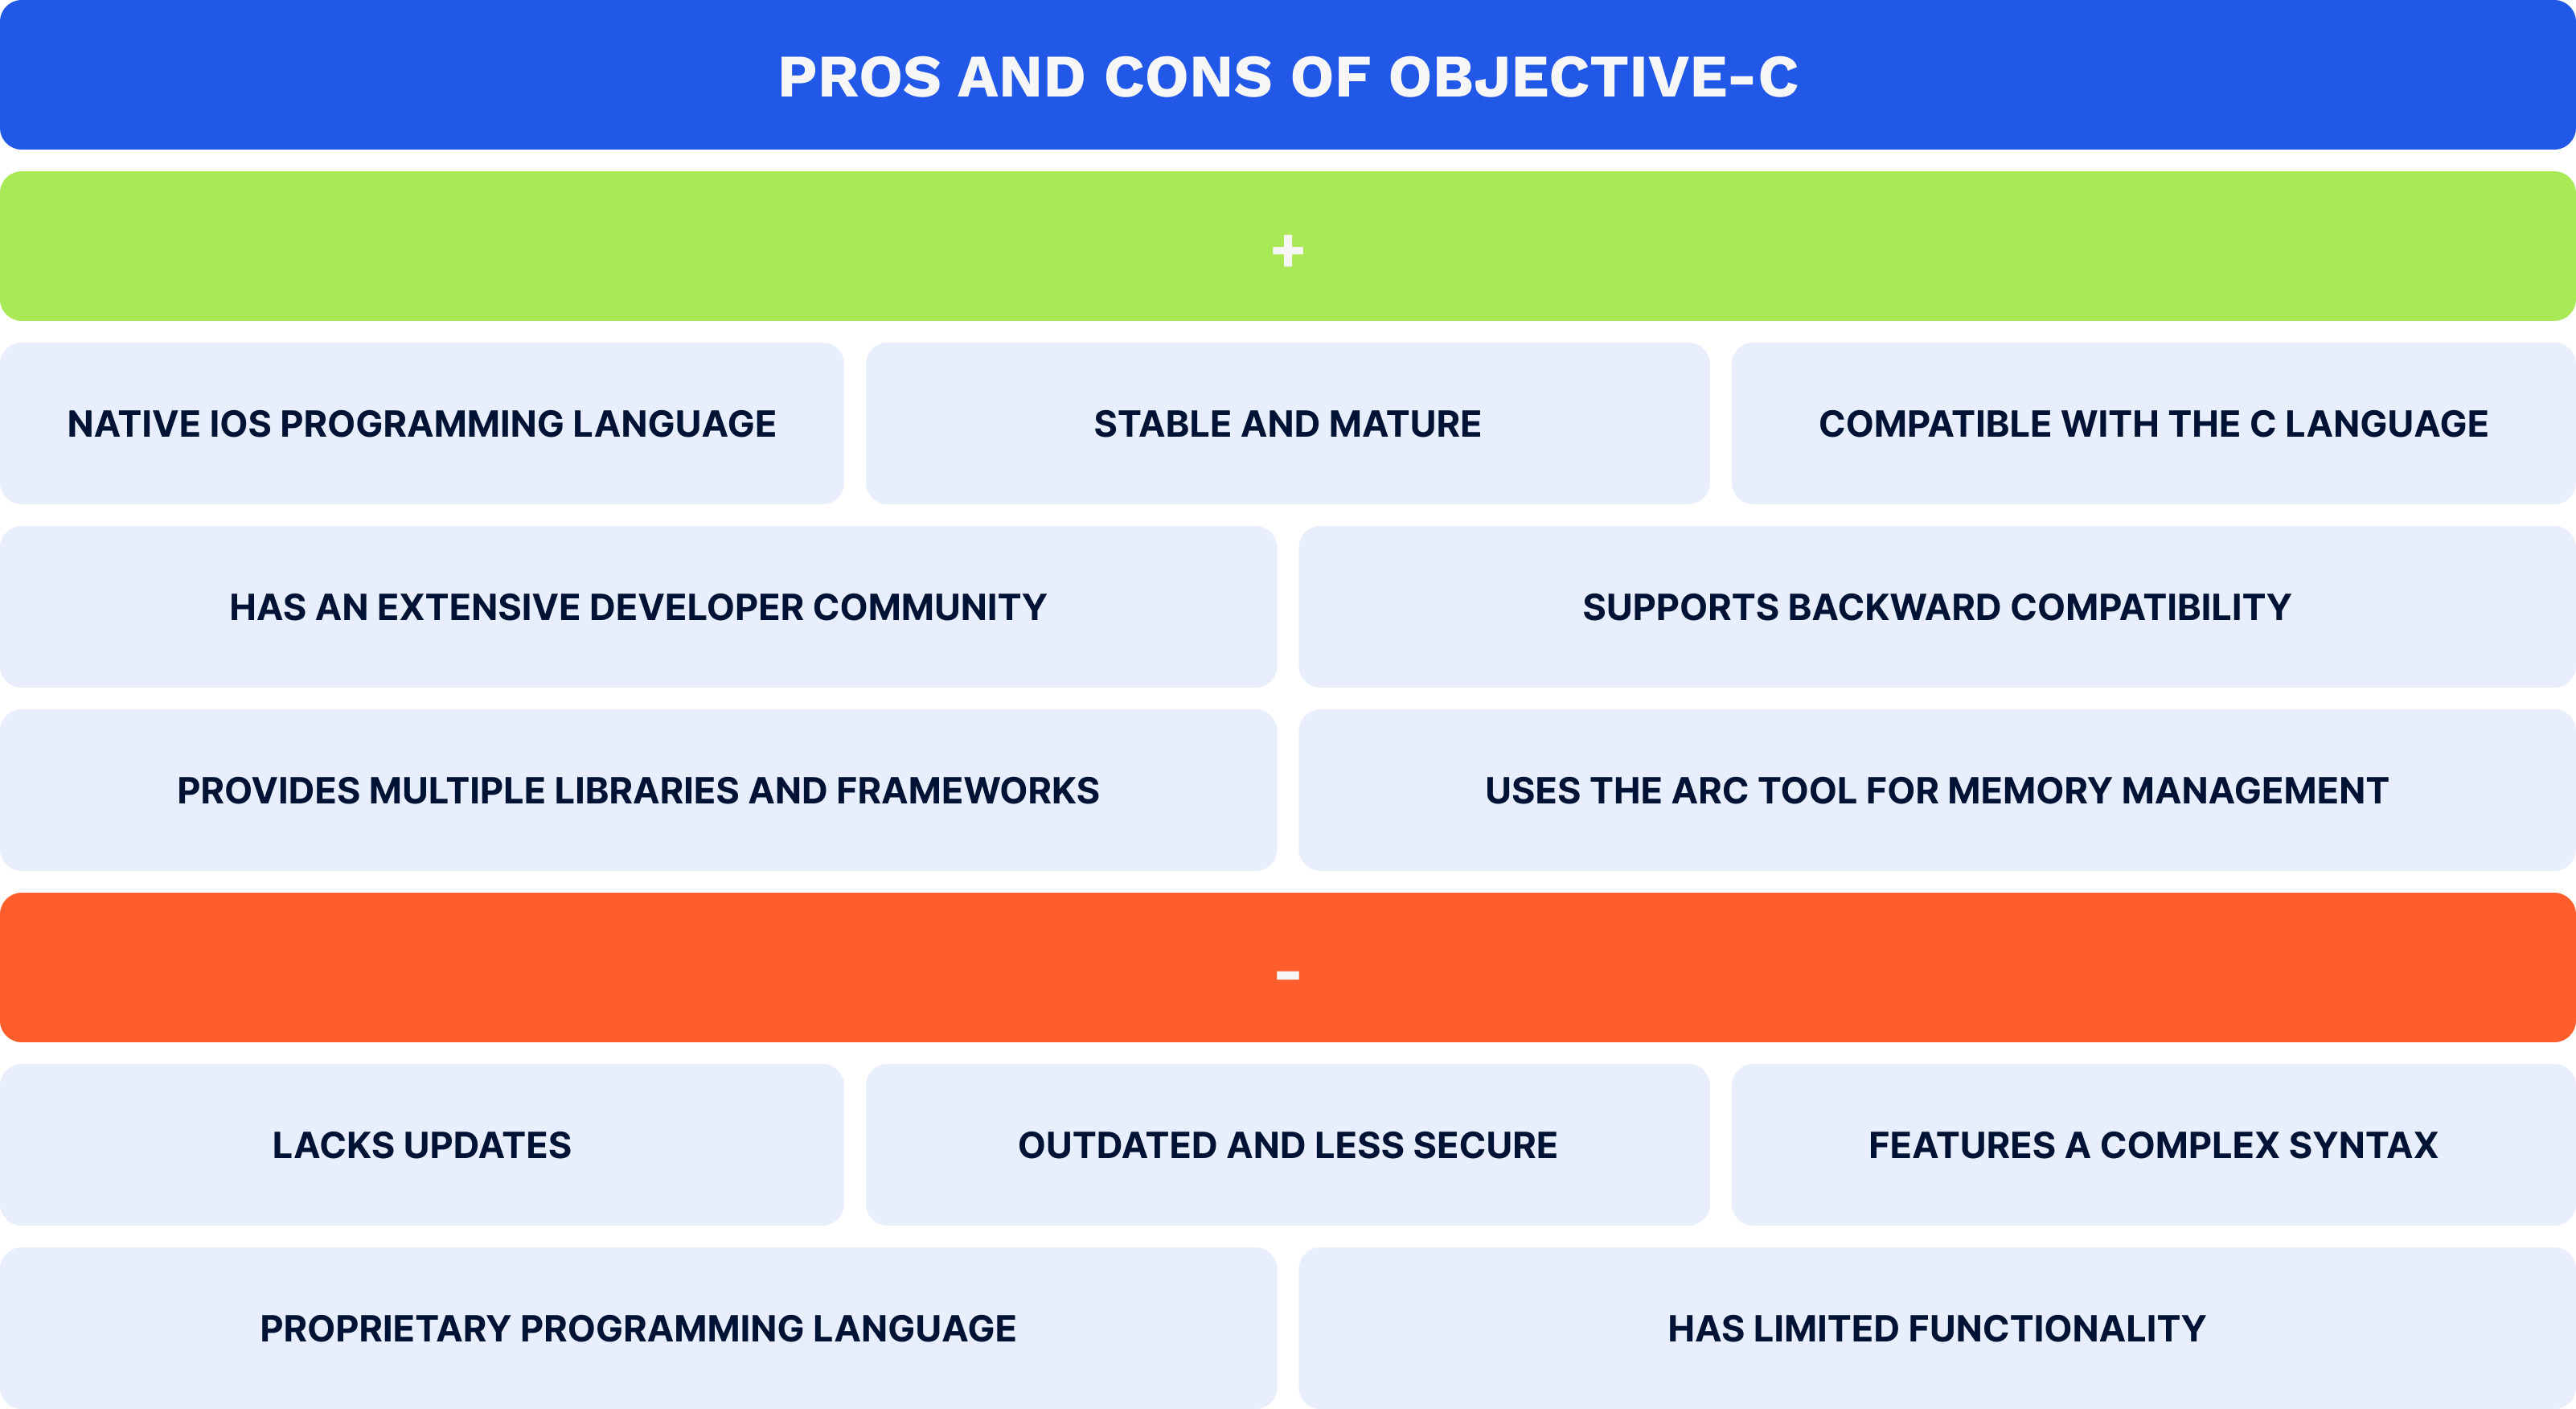 Pros and cons of Objective-C